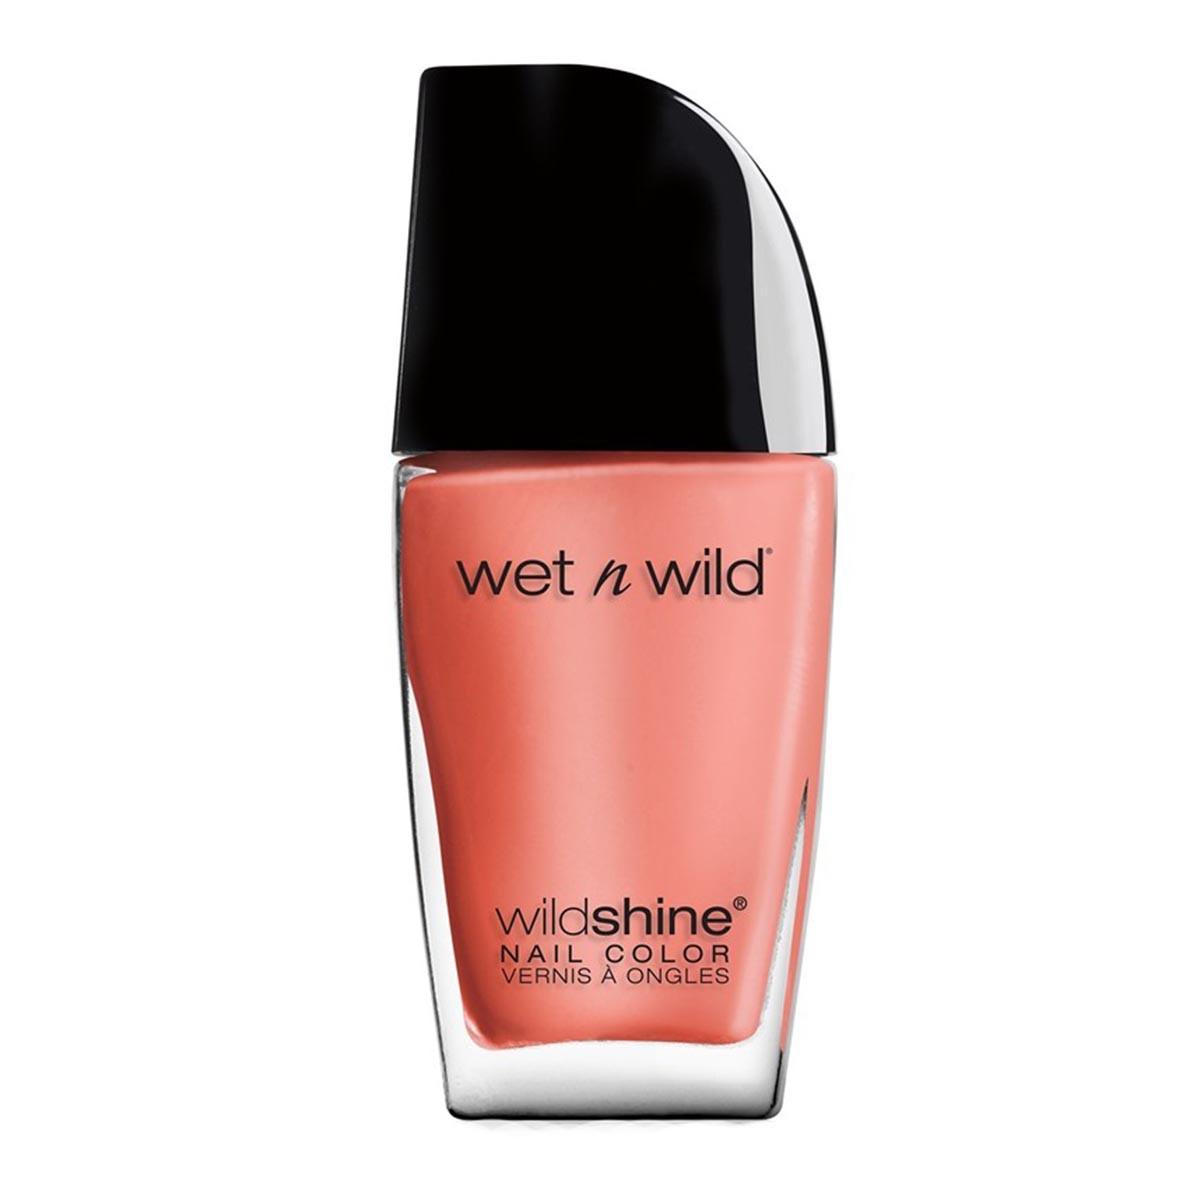 wet-n-wild-wildshine-nail-color-she-sells